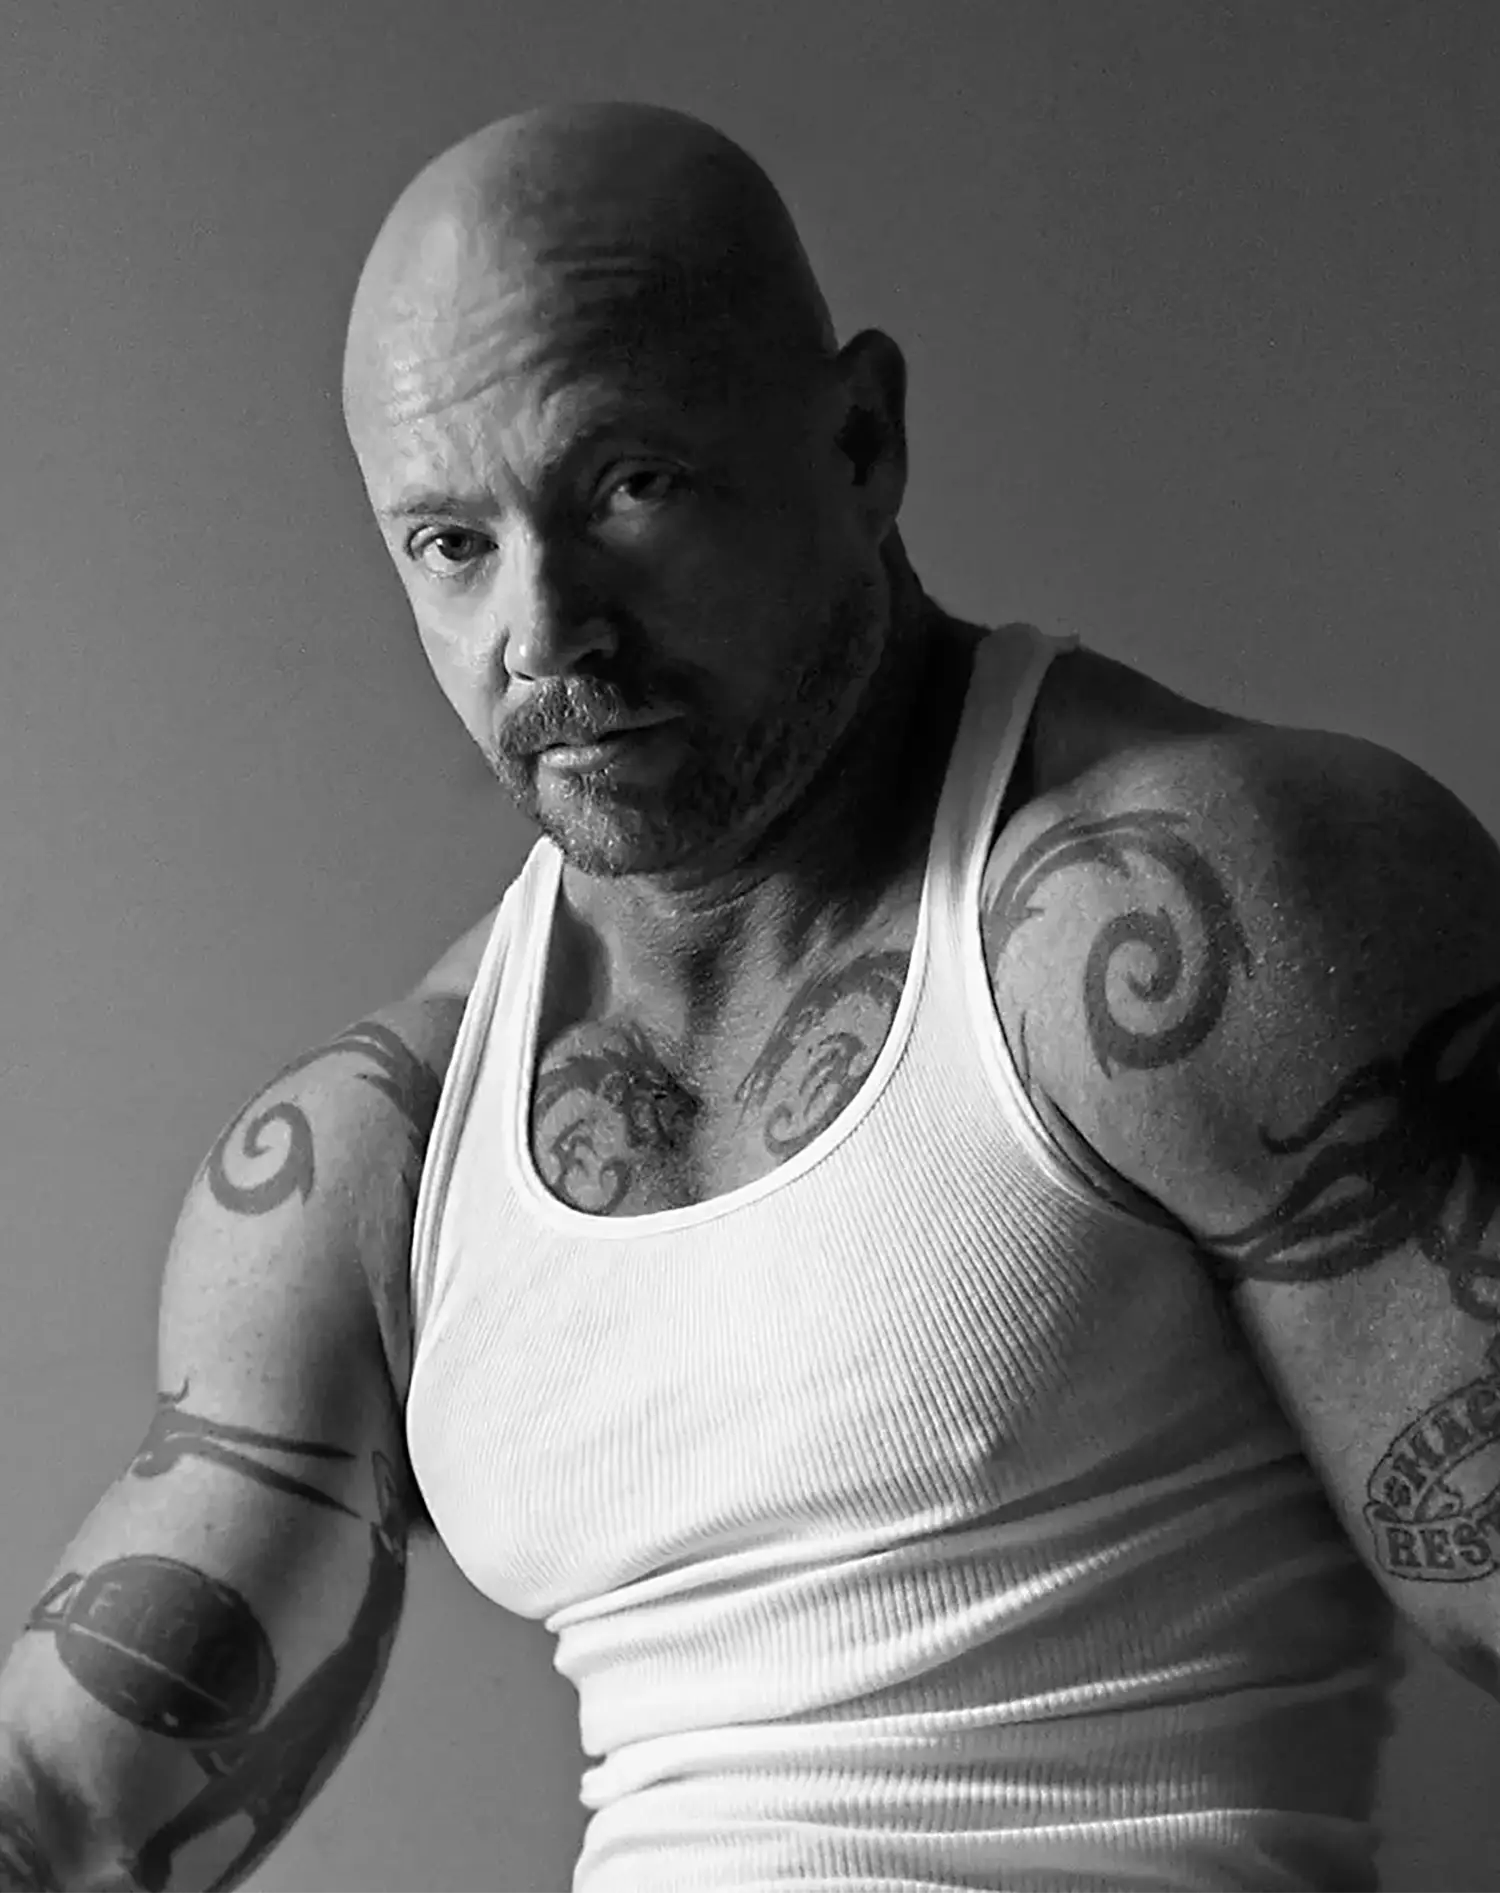 A studio portrait of a bald and bearded Buck Angel looking intently at the camera. He is wearing a white tank top that reveals arm and chest tattoos. 